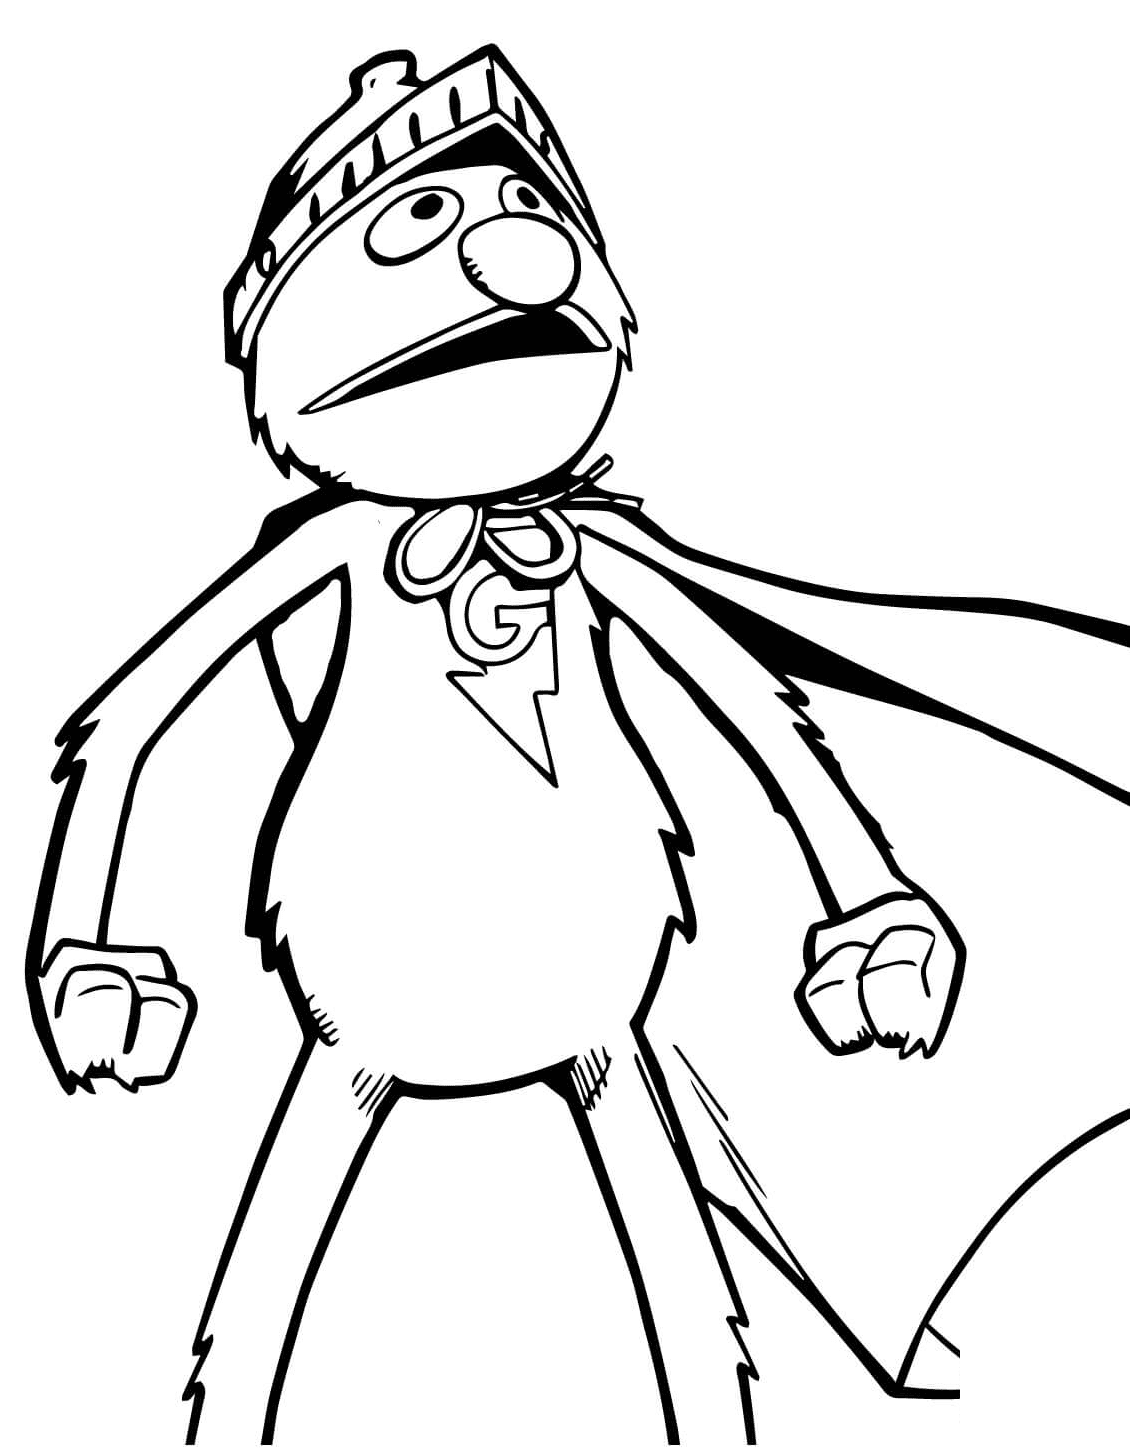 Super Grover Coloring Page